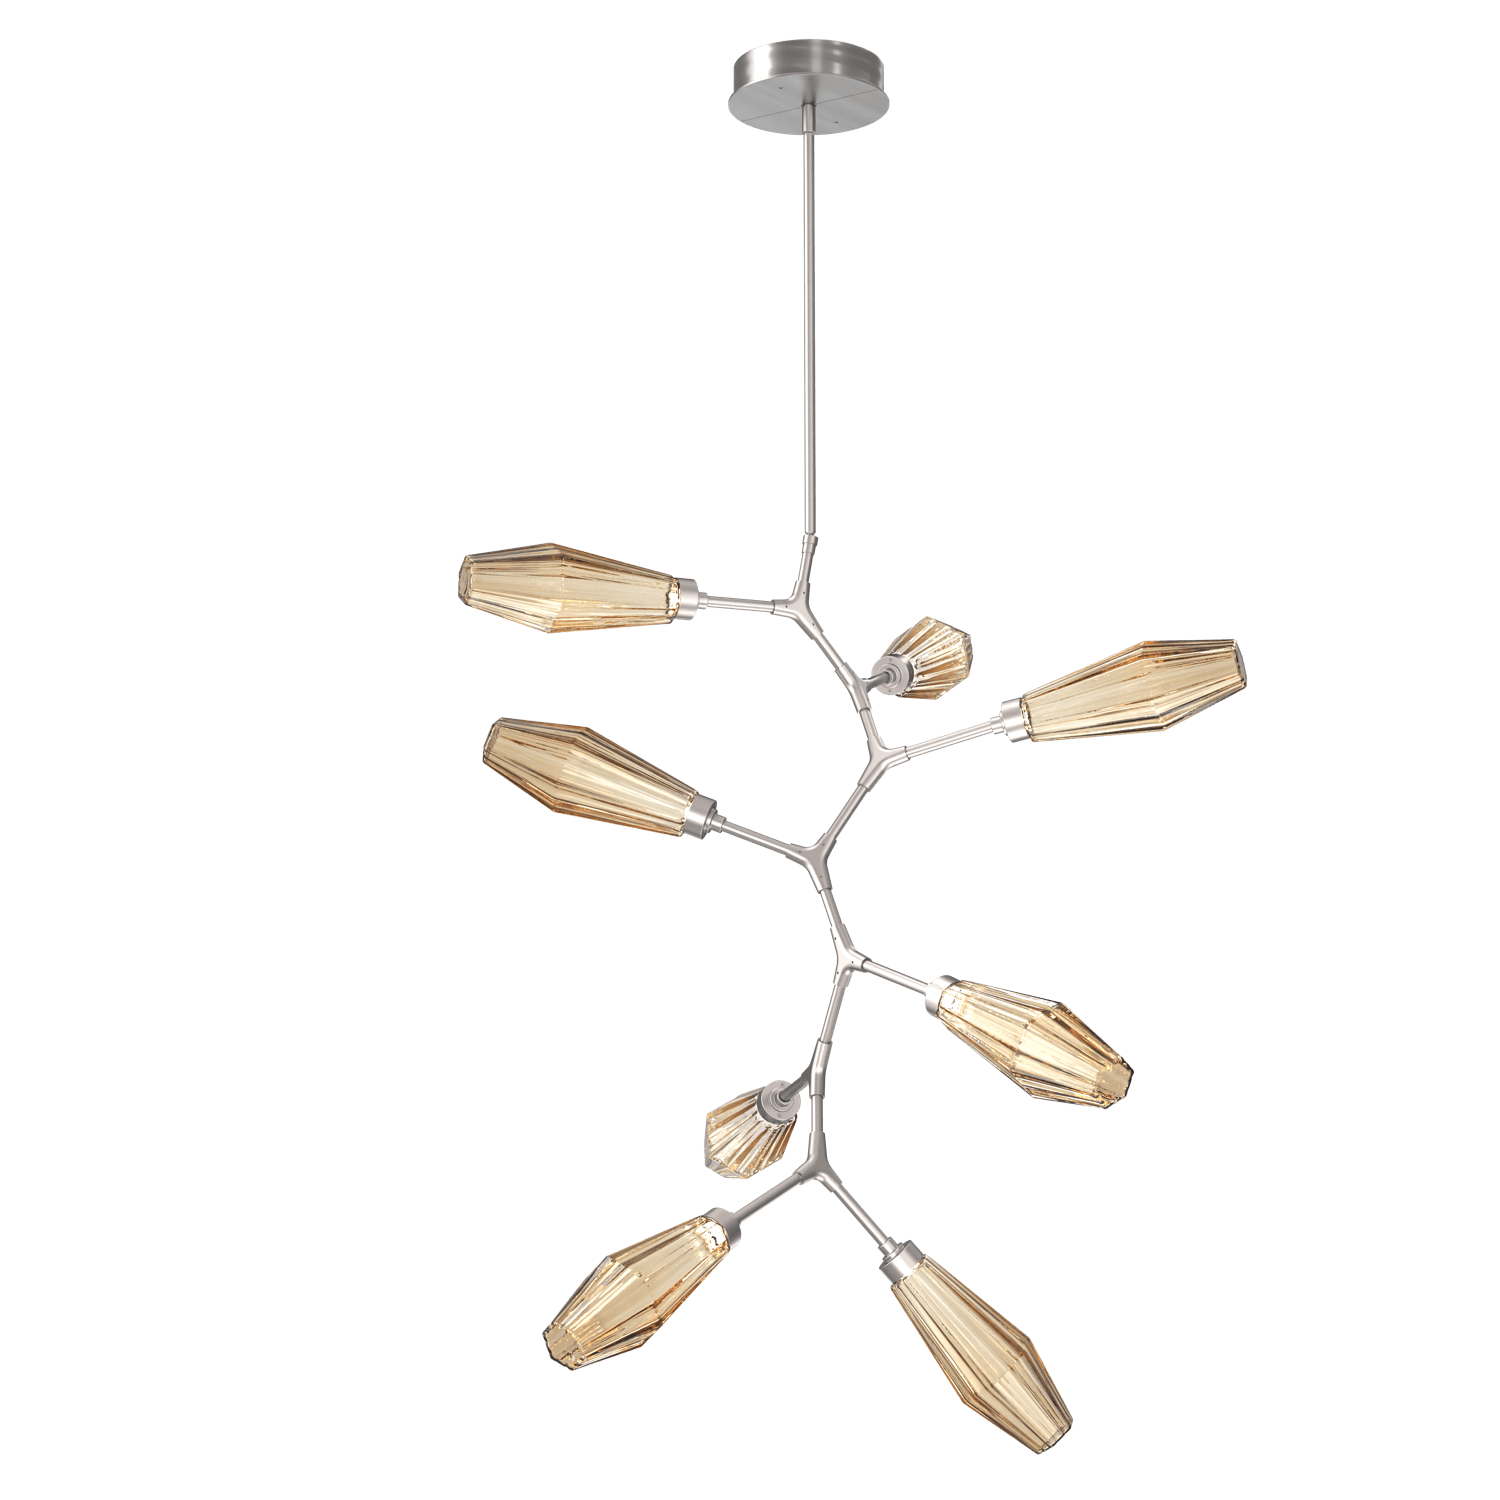 CHB0049-VB-SN-RB-Hammerton-Studio-Aalto-8-light-modern-vine-chandelier-with-satin-nickel-finish-and-optic-ribbed-bronze-glass-shades-and-LED-lamping